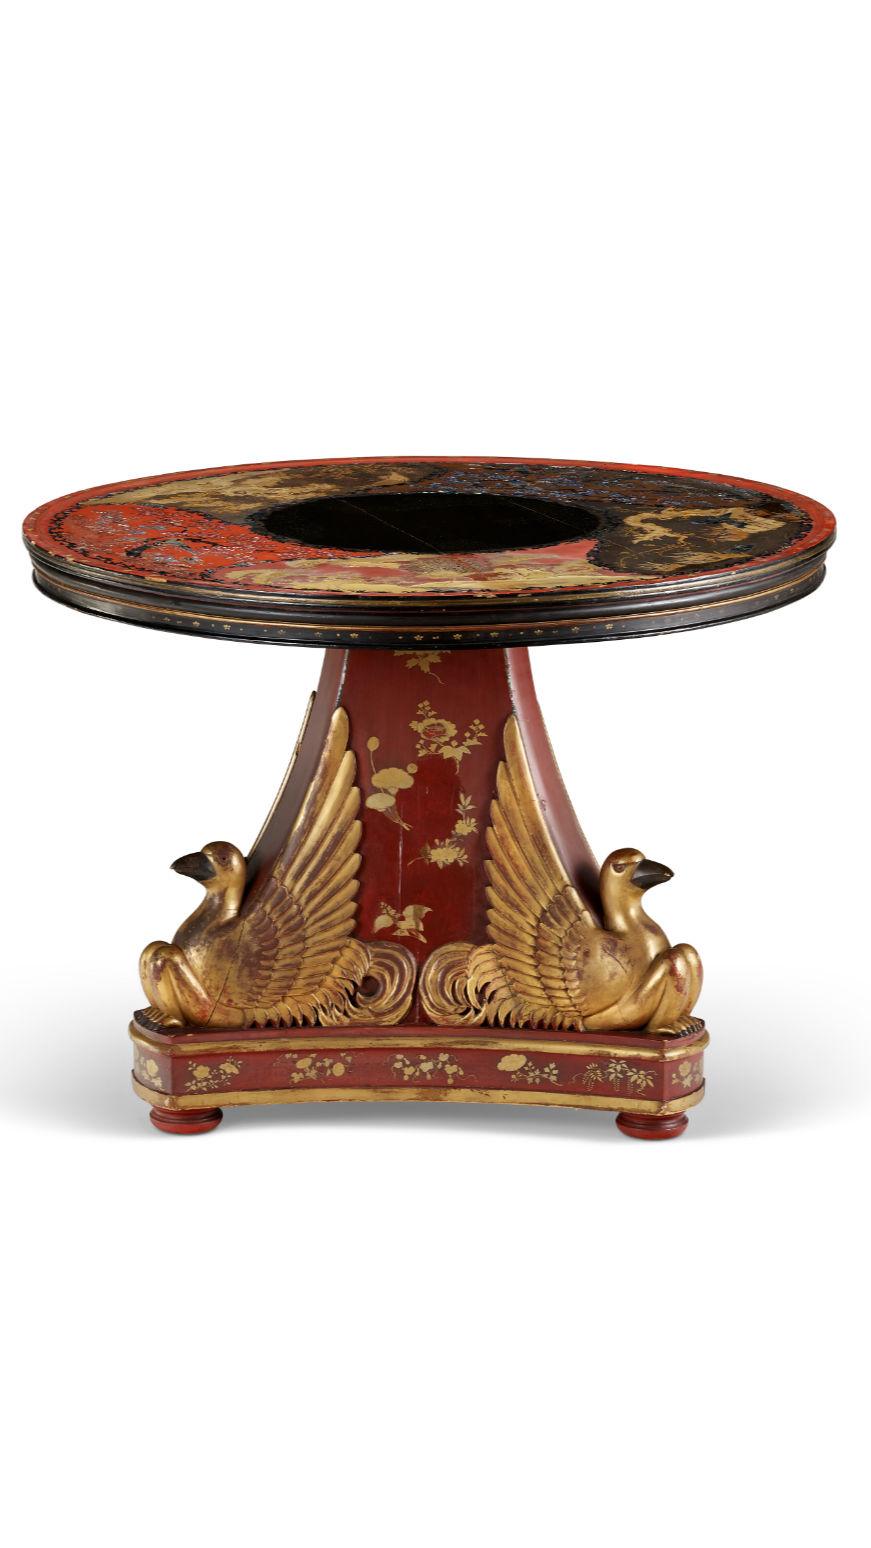 Gilt Japanese Export Red Lacquer Center Table with European Pedestal